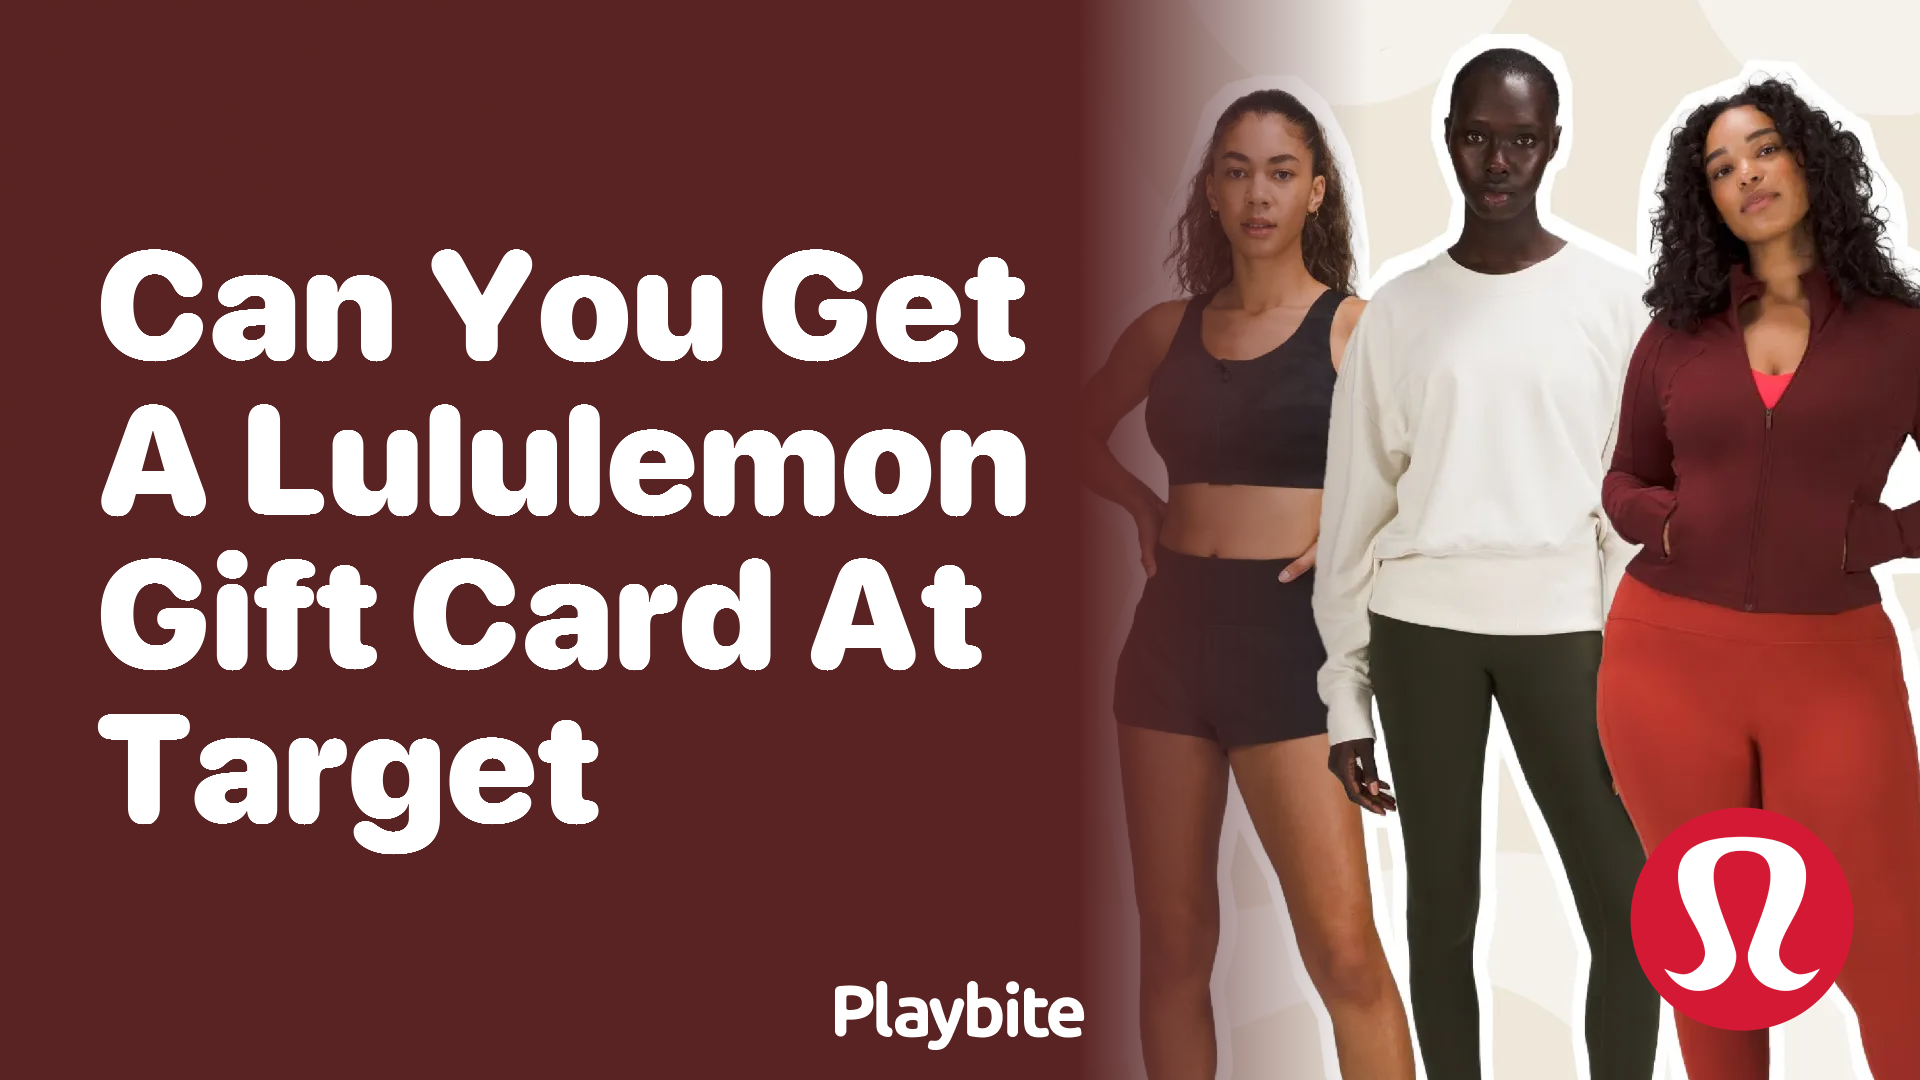 Can You Get a Lululemon Gift Card at Target? - Playbite